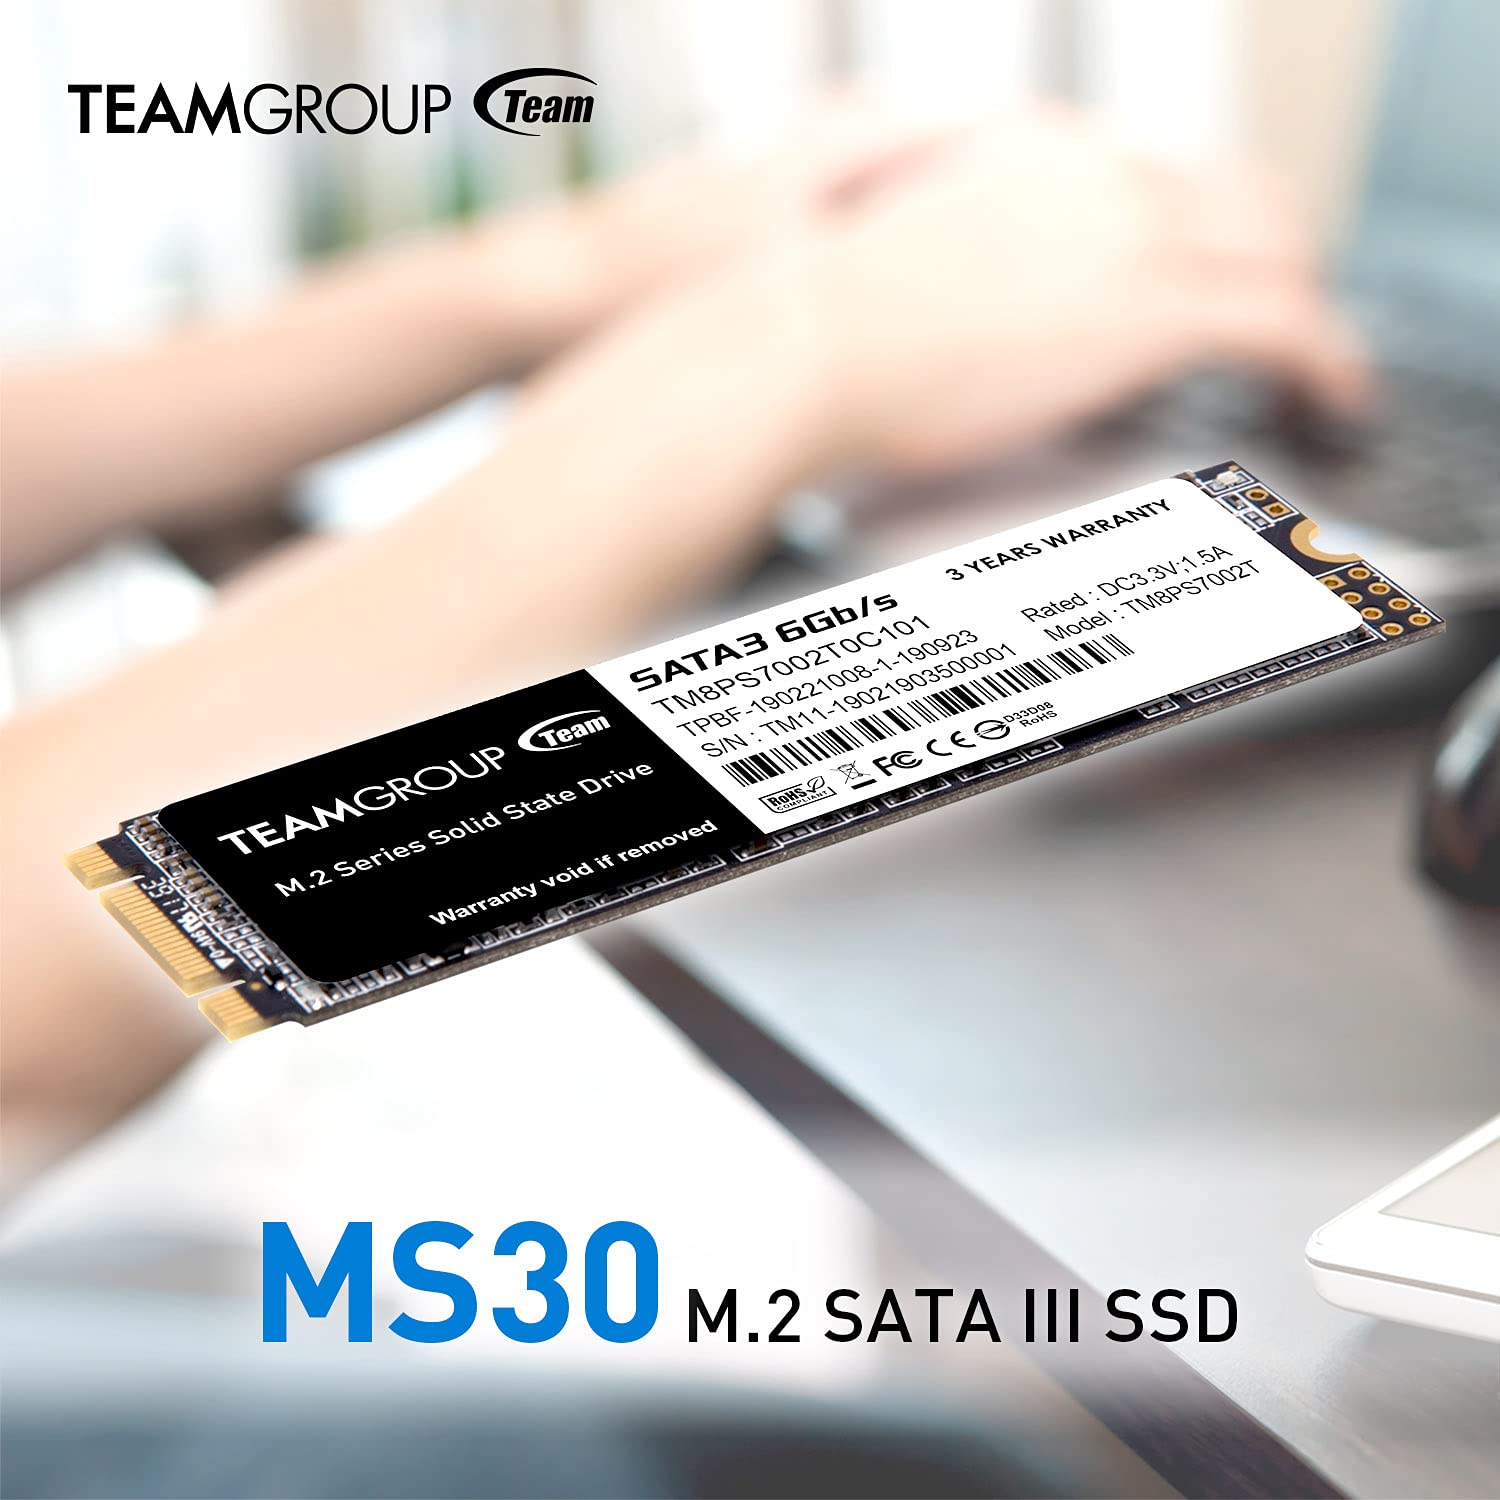 TeamGroup MS30 M.2 2280 TLC SATA III Solid State Drives: 1TB $40, 512GB $21